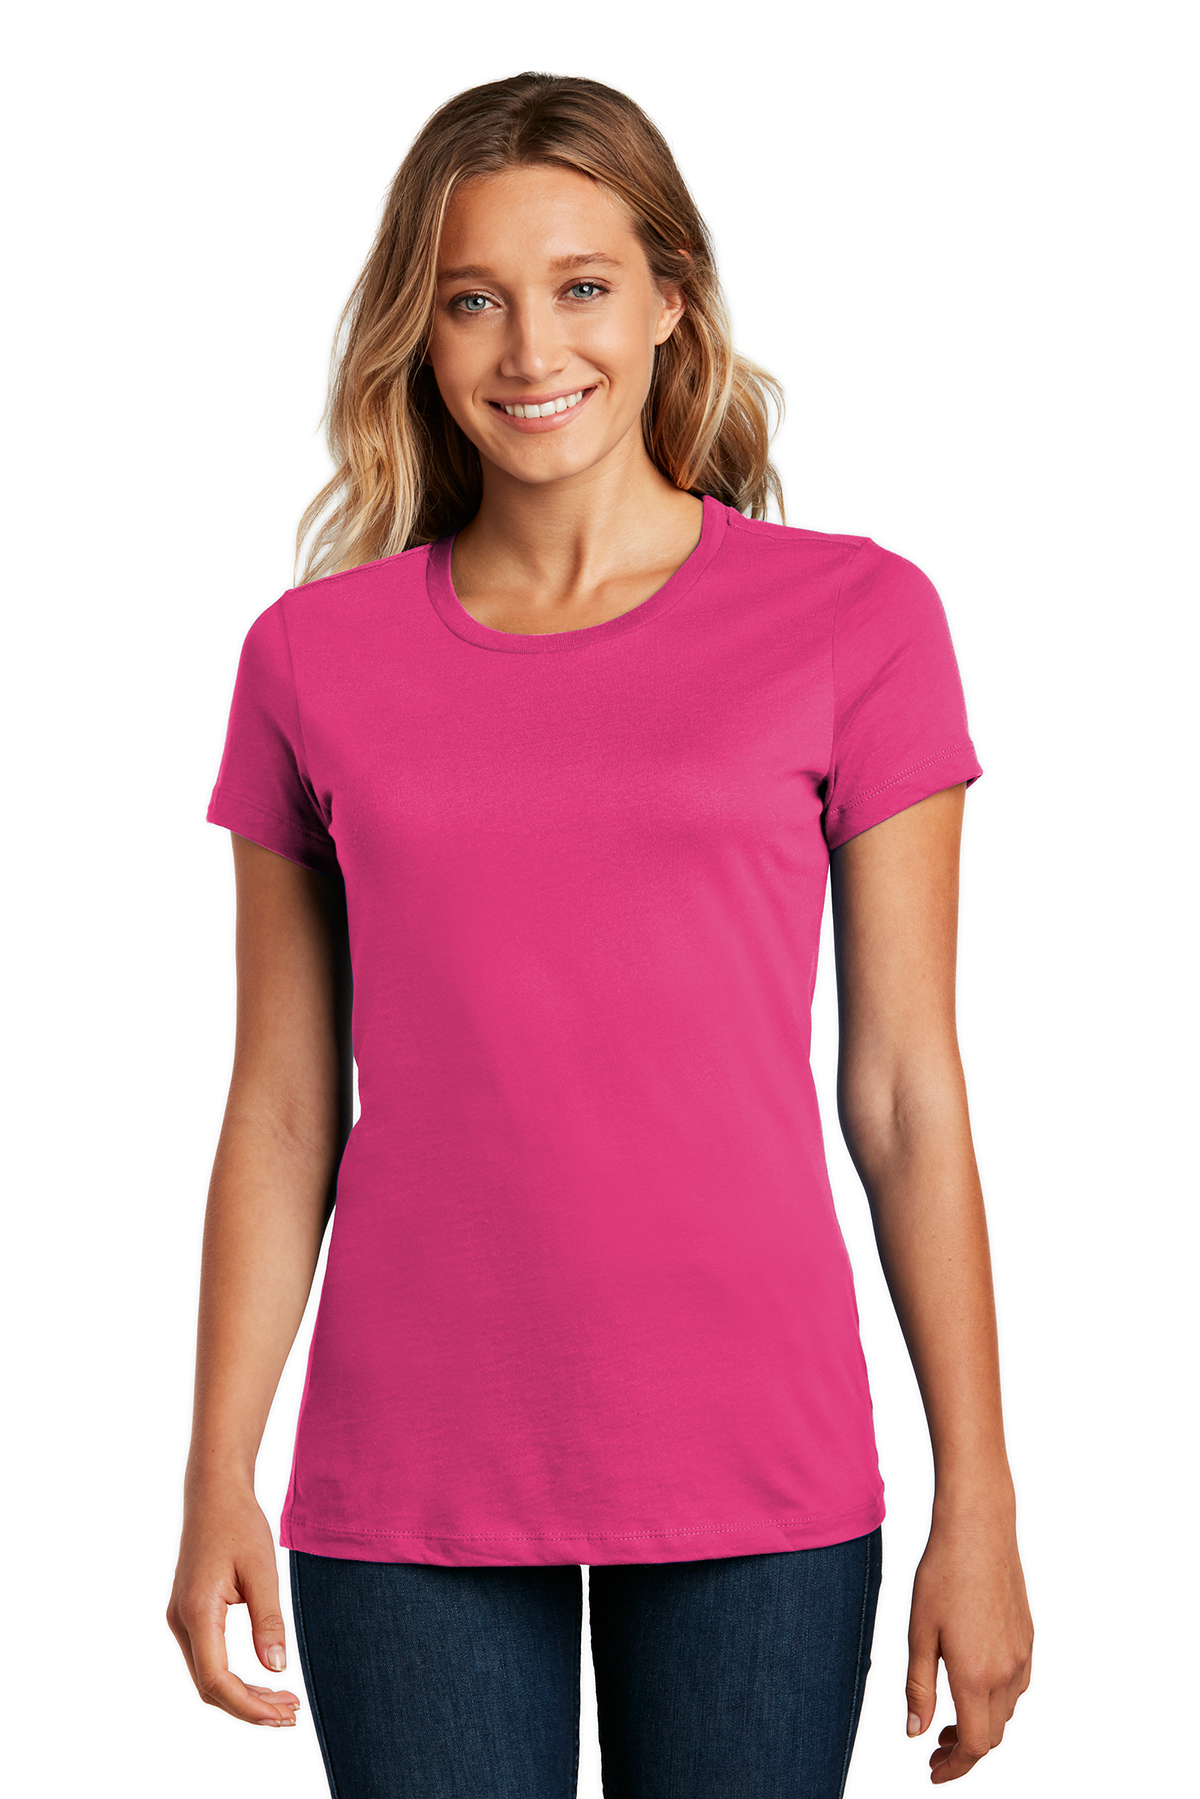 District Women’s Perfect Weight Tee | Product | District